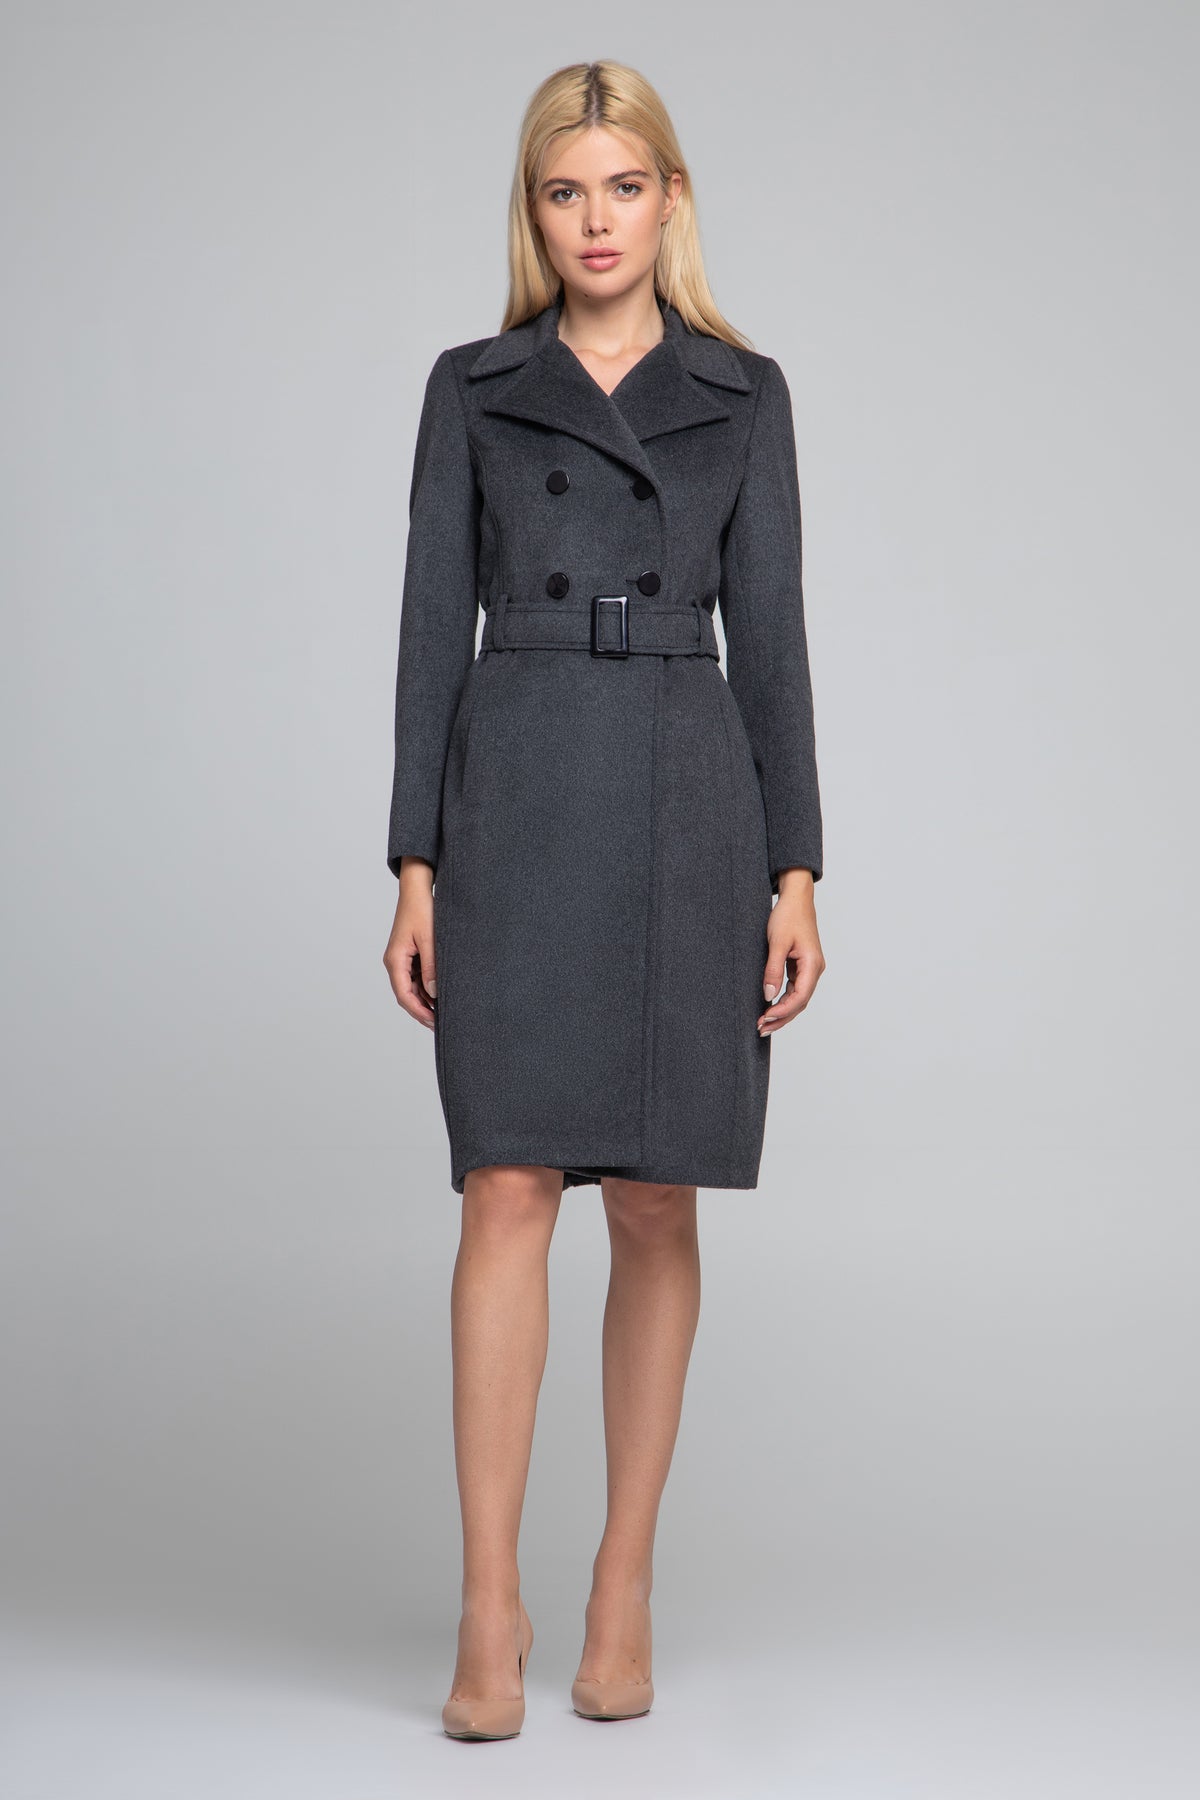 Grey wool and cashmere blend coat with double-breasted silhouette and pleated back